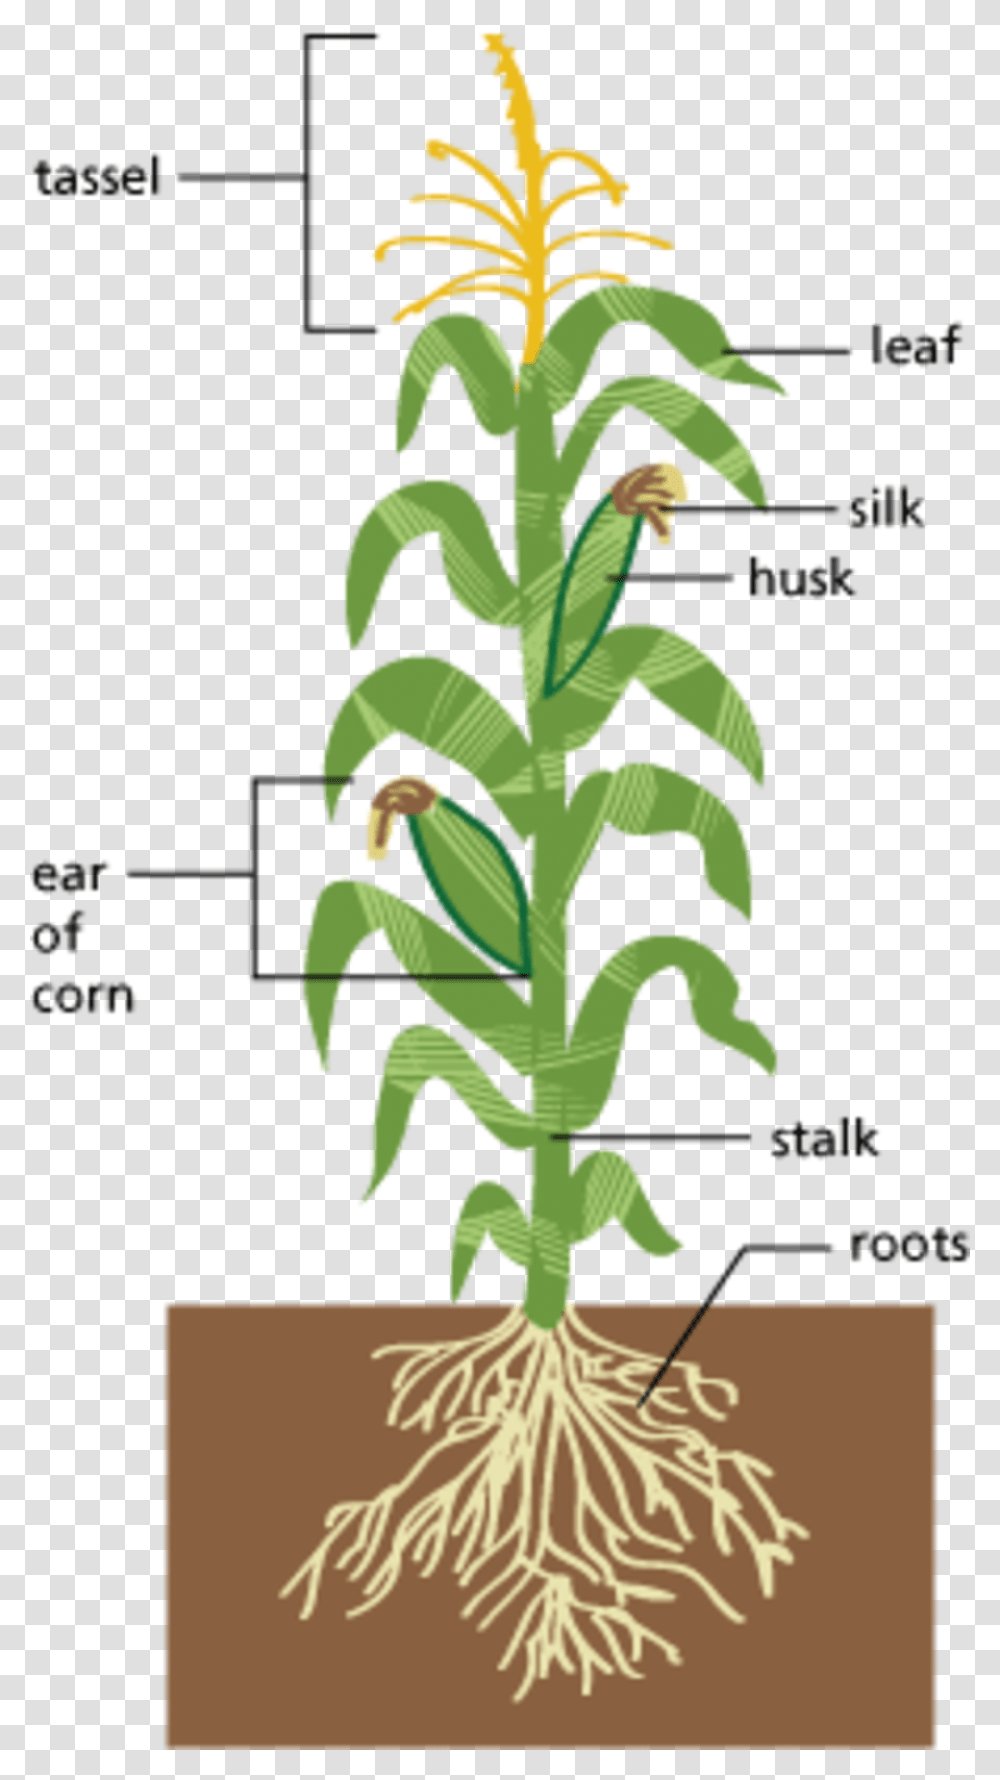 Image Of Edible Parts Of A Plant Diagram Large Size Parts Of A Corn Plant Diagram, Tree, Flower, Blossom, Poster Transparent Png